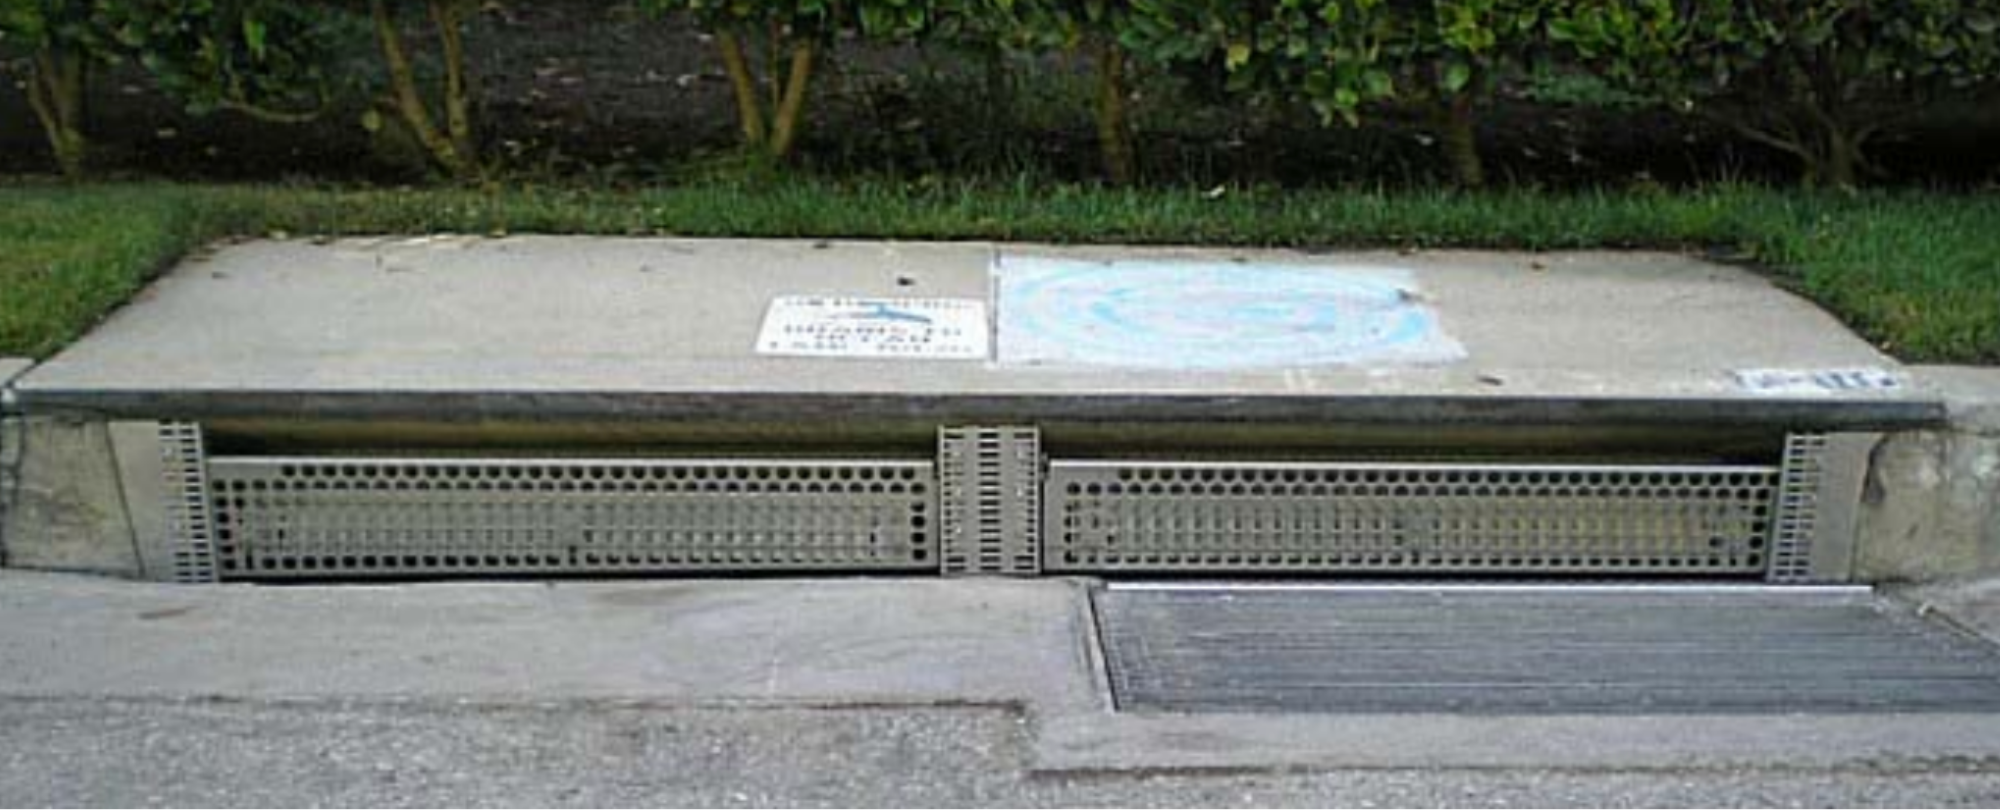 A variety of stormwater trash capture and filtration devices designed to work in a distributed manner across a range of street drains. Image credit San Francisco Estuary Partnership